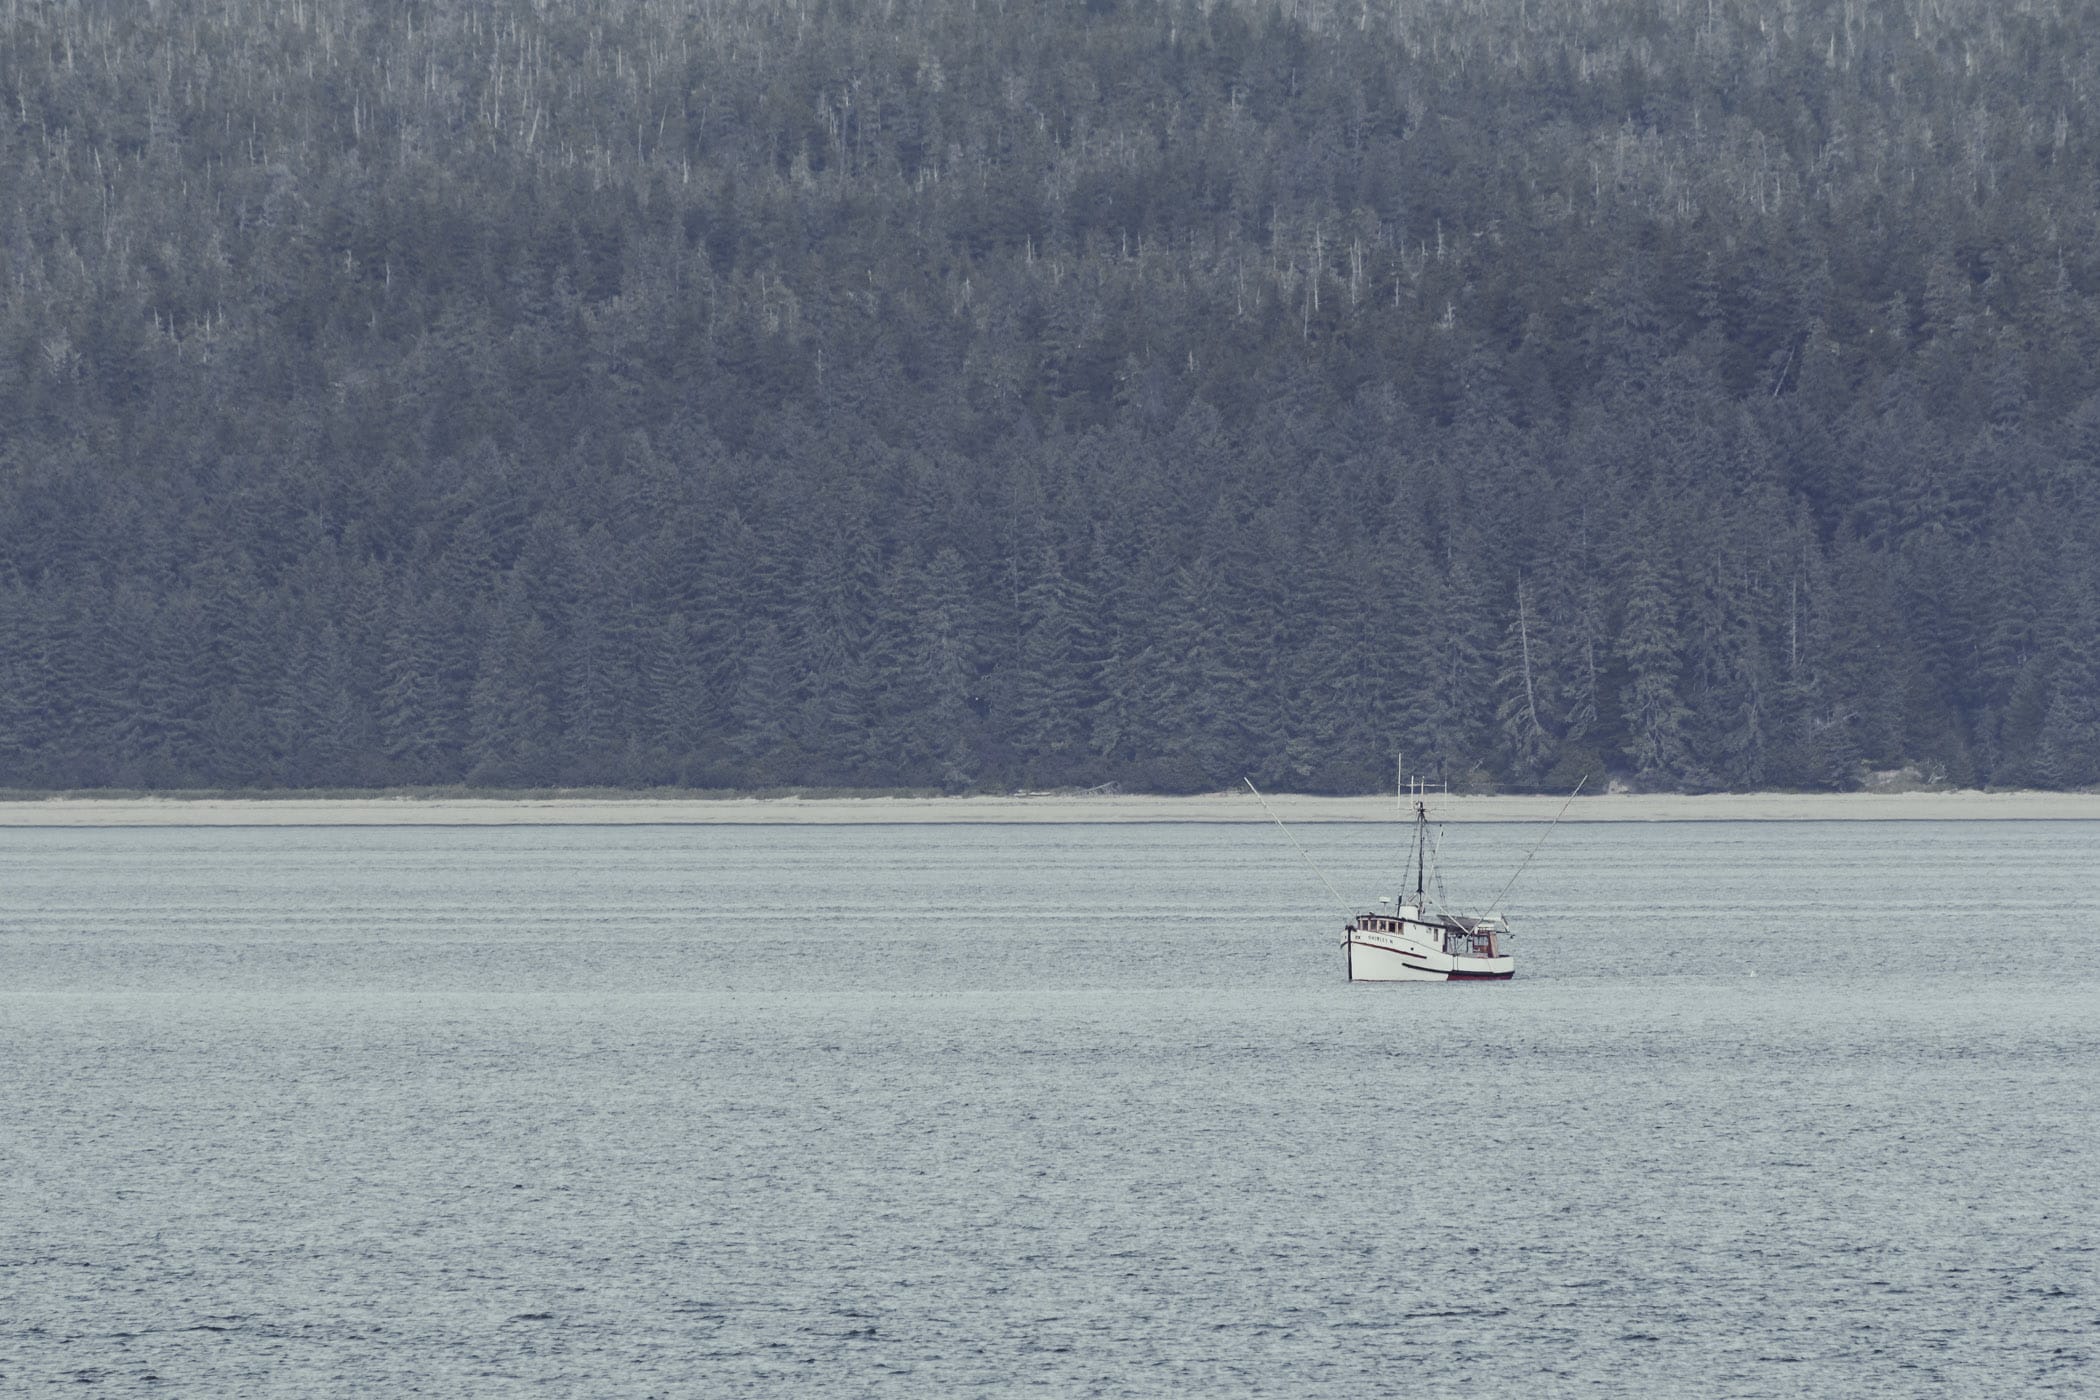 A fishing vessel trawls the waters of Alaska's Glacier Bay National Park.